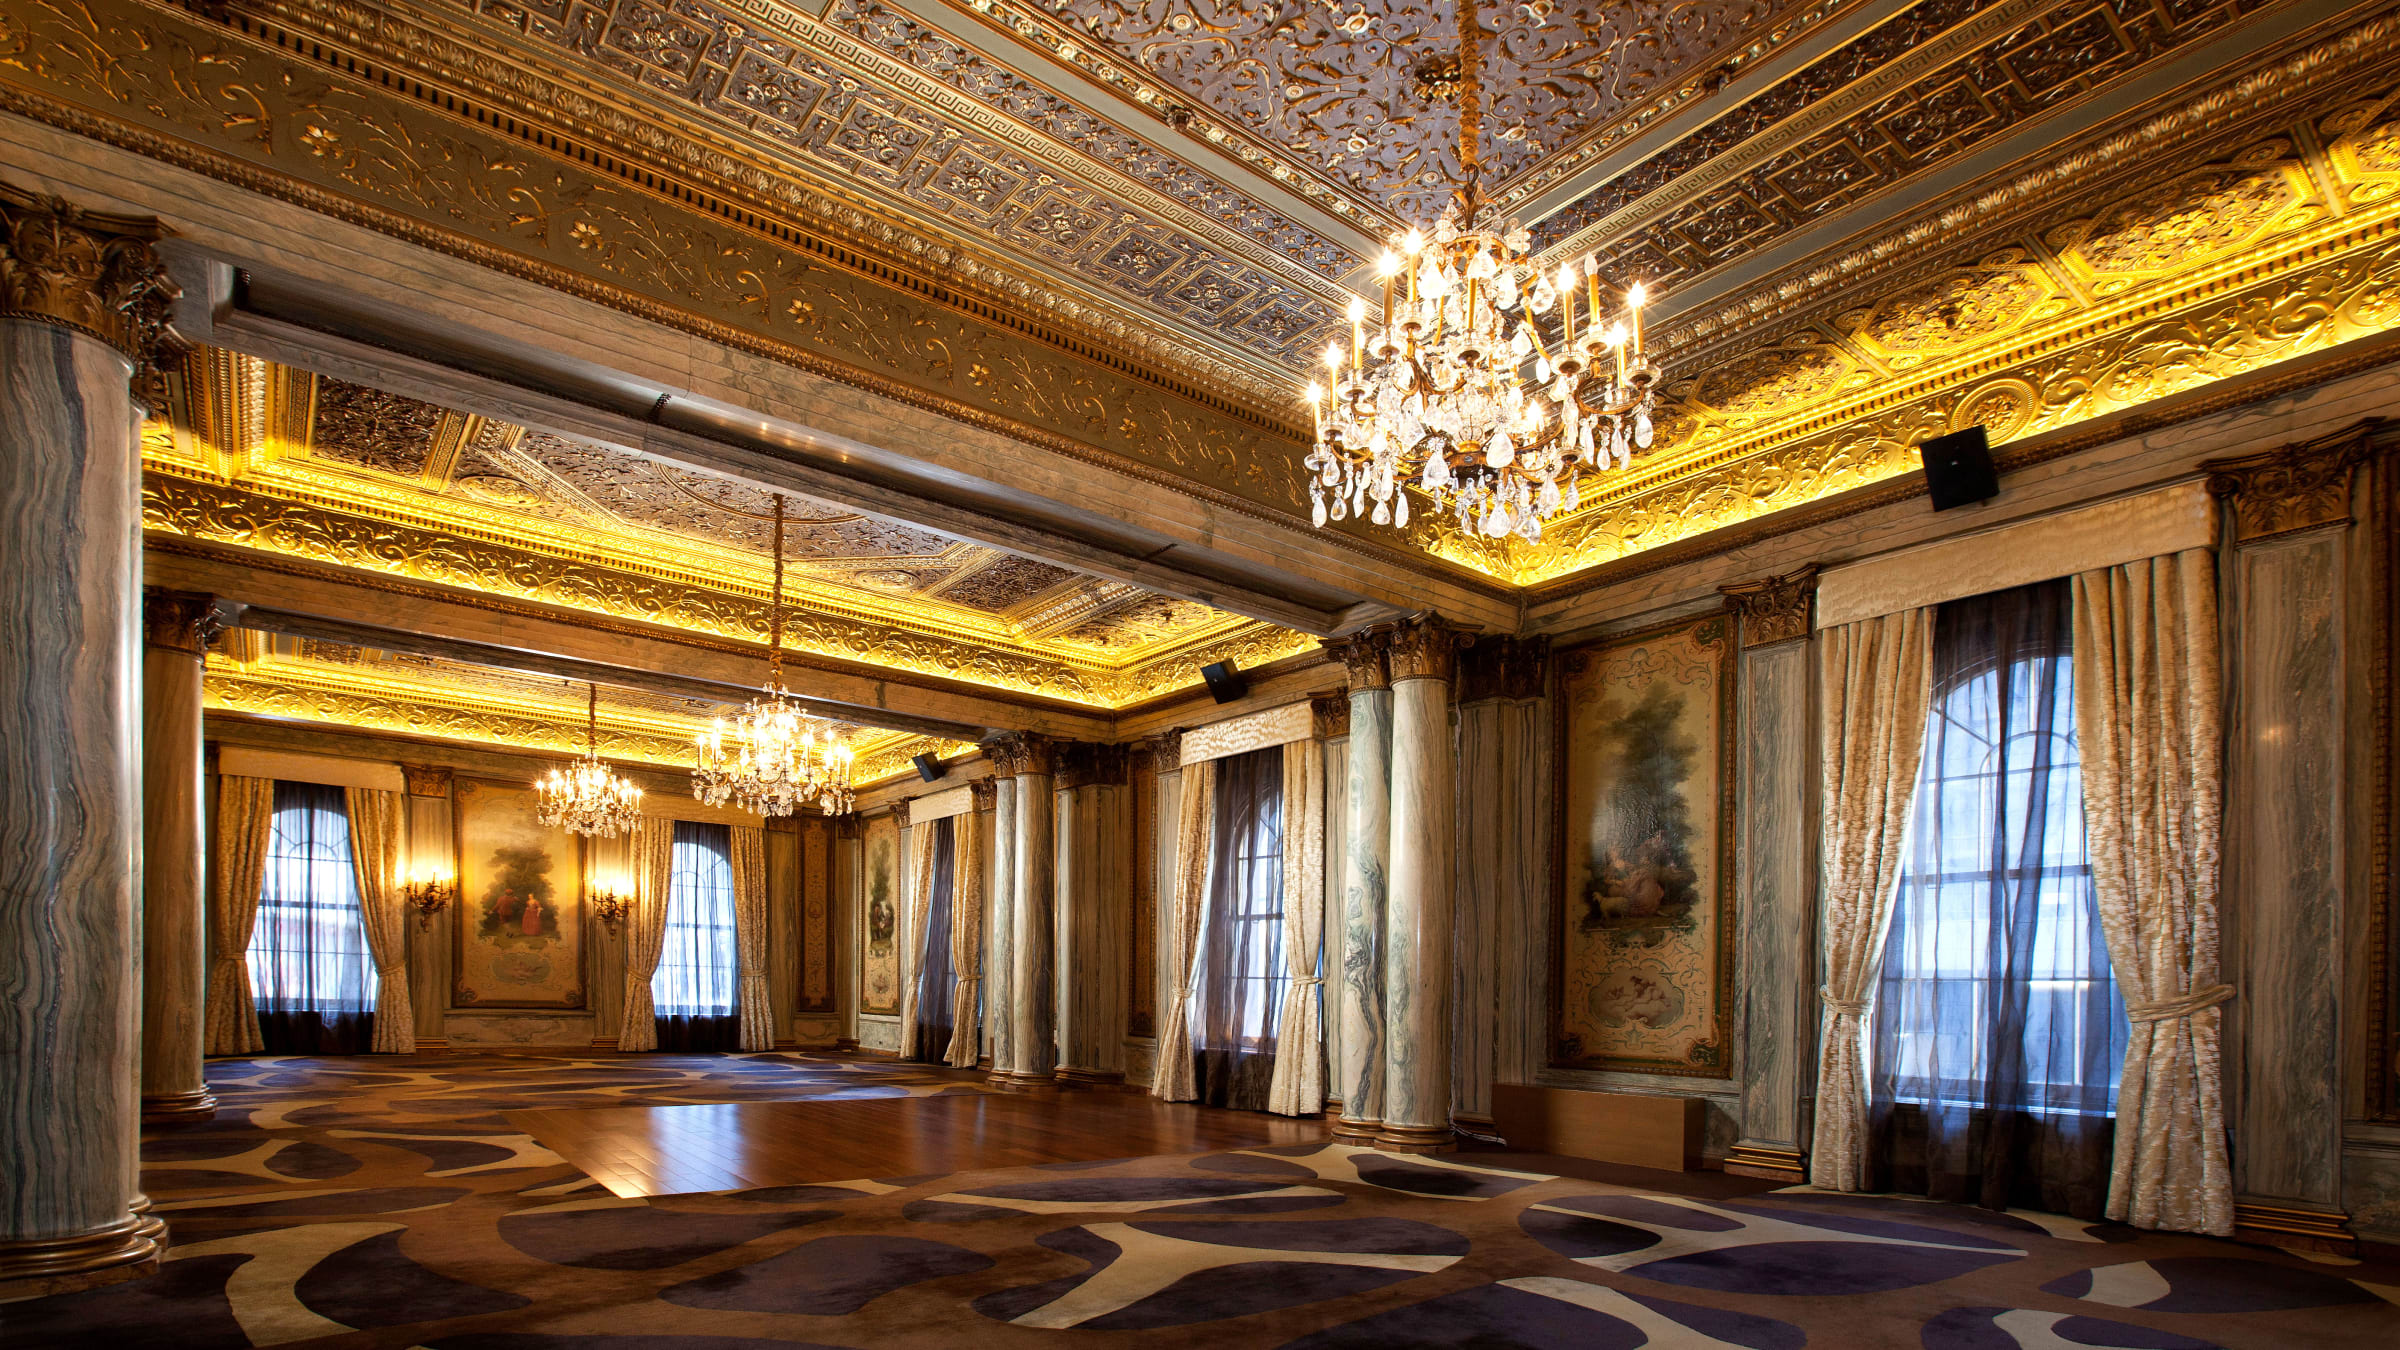 Villard House, the NYC Mansion of Doomed Railroad Tycoon, Now Open for Tours by Lotte New York Palace Hotel pic